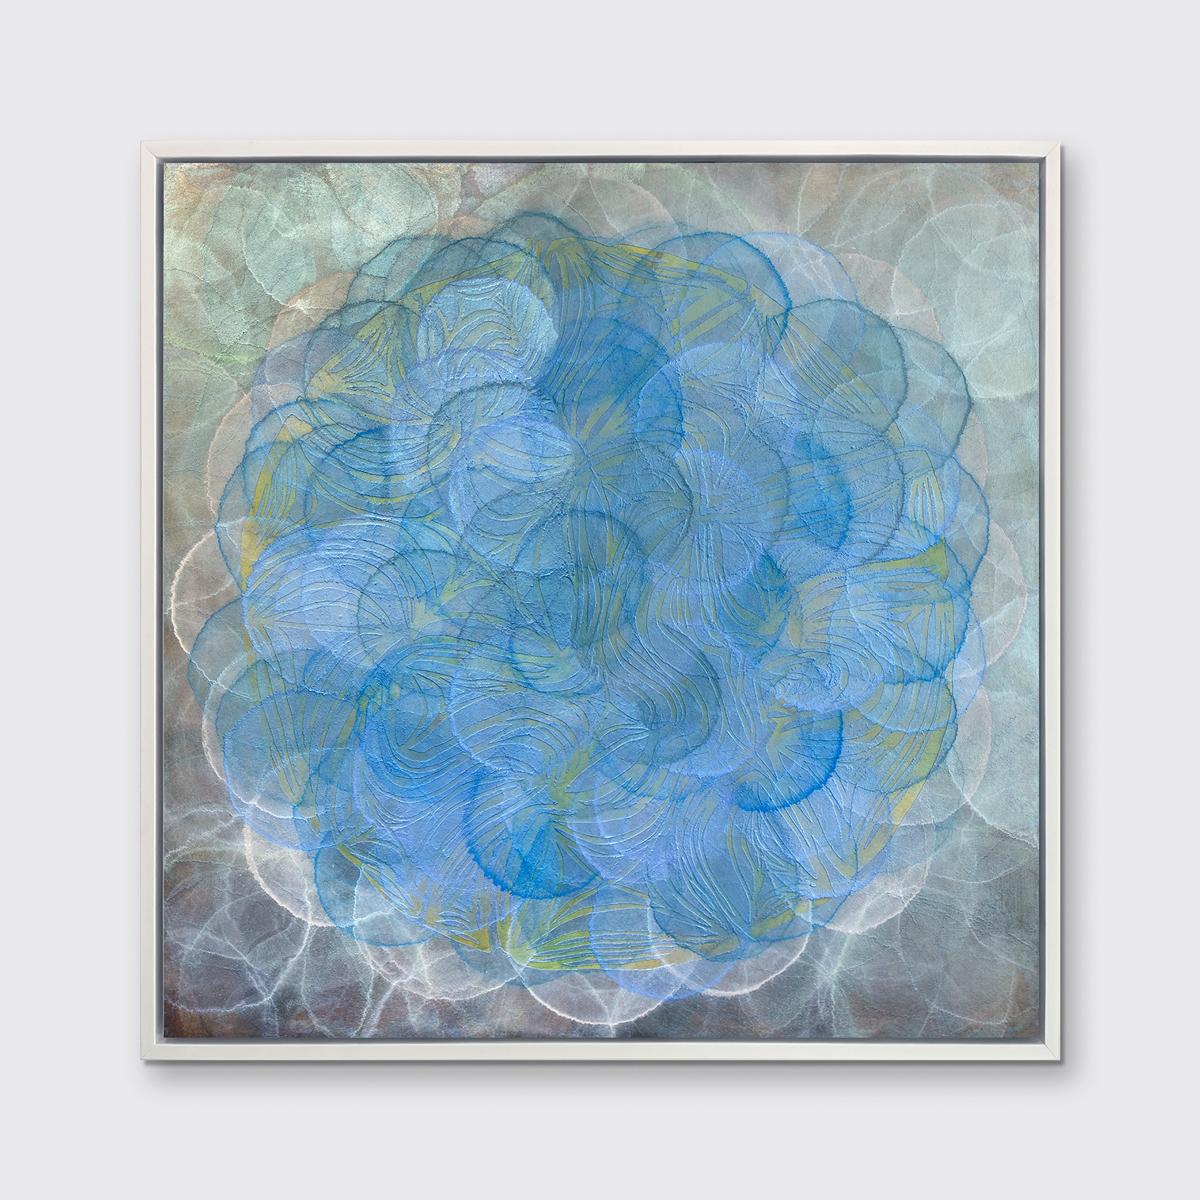 This abstract contemporary limited edition print by Roger Mudre features a cool-toned palette. Circles with light outlines overlap one another in varying blue, green, white shades to create a larger blue circular form at the center of the